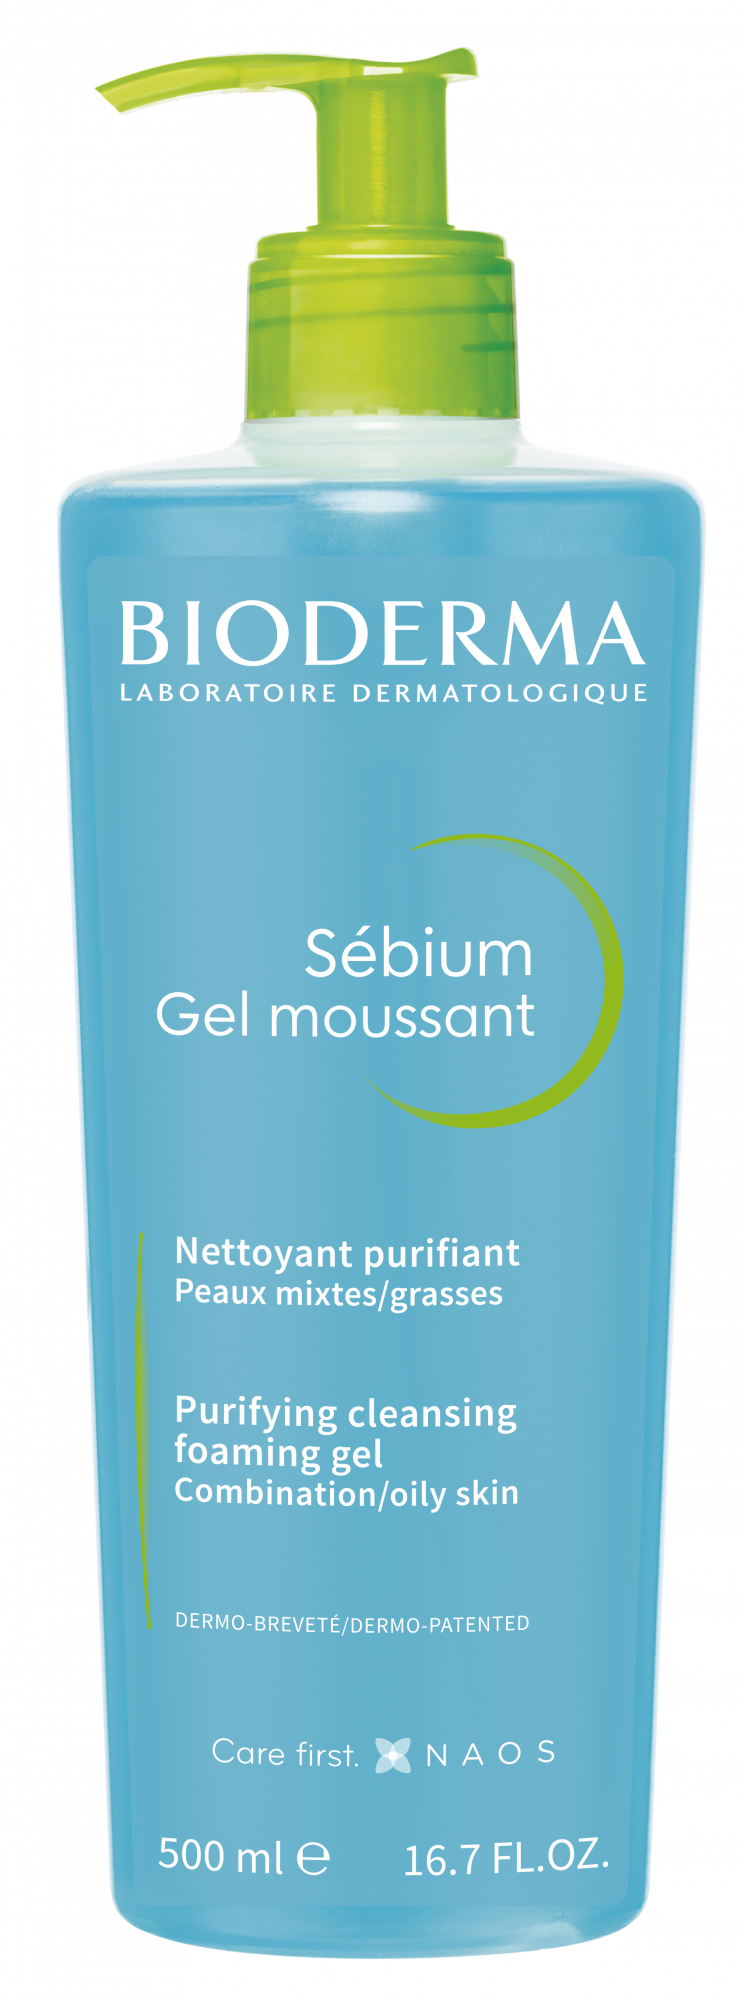 Sébium Gel moussant  Body & face wash for acne, cleanser for oily skin